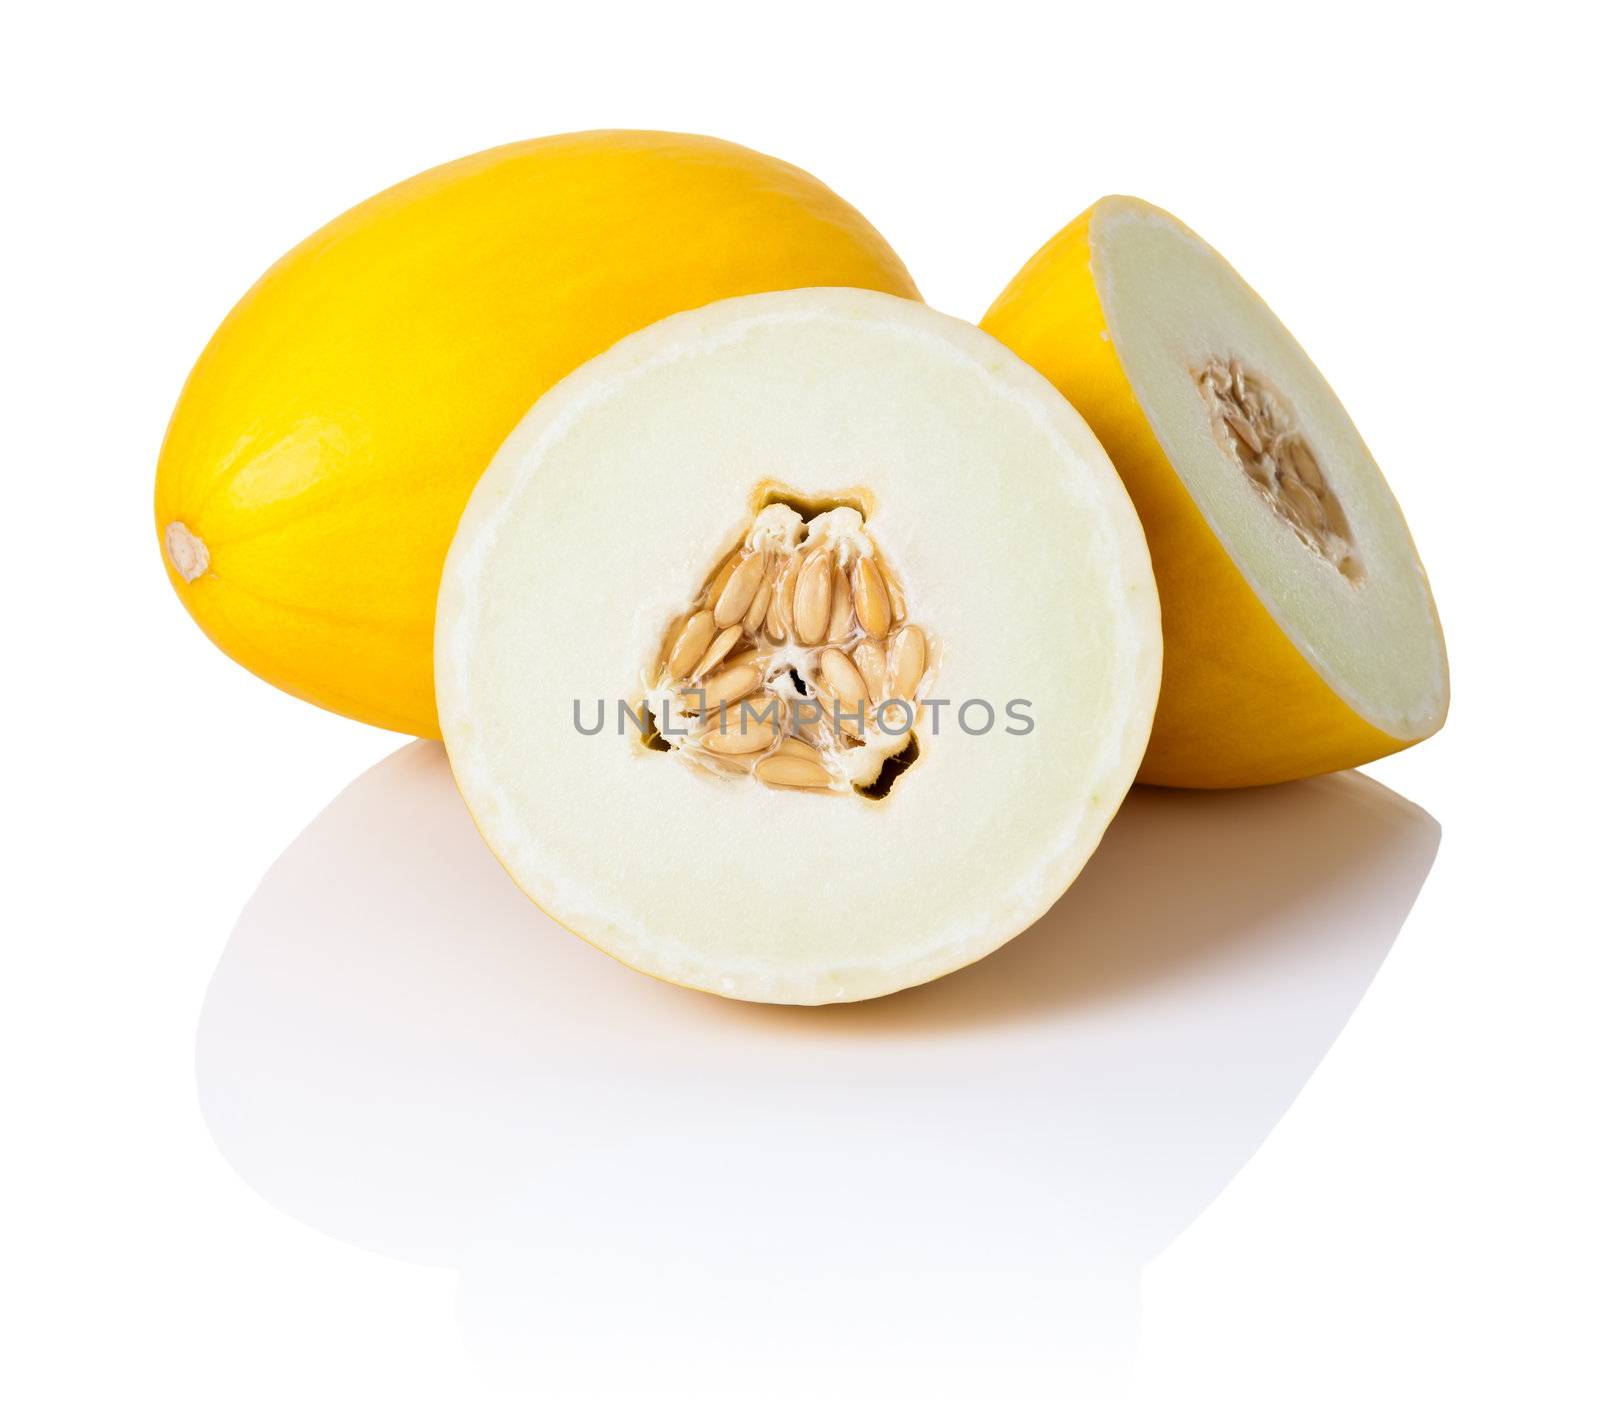 Two honeydew melons on white background. One sliced in half, second whole